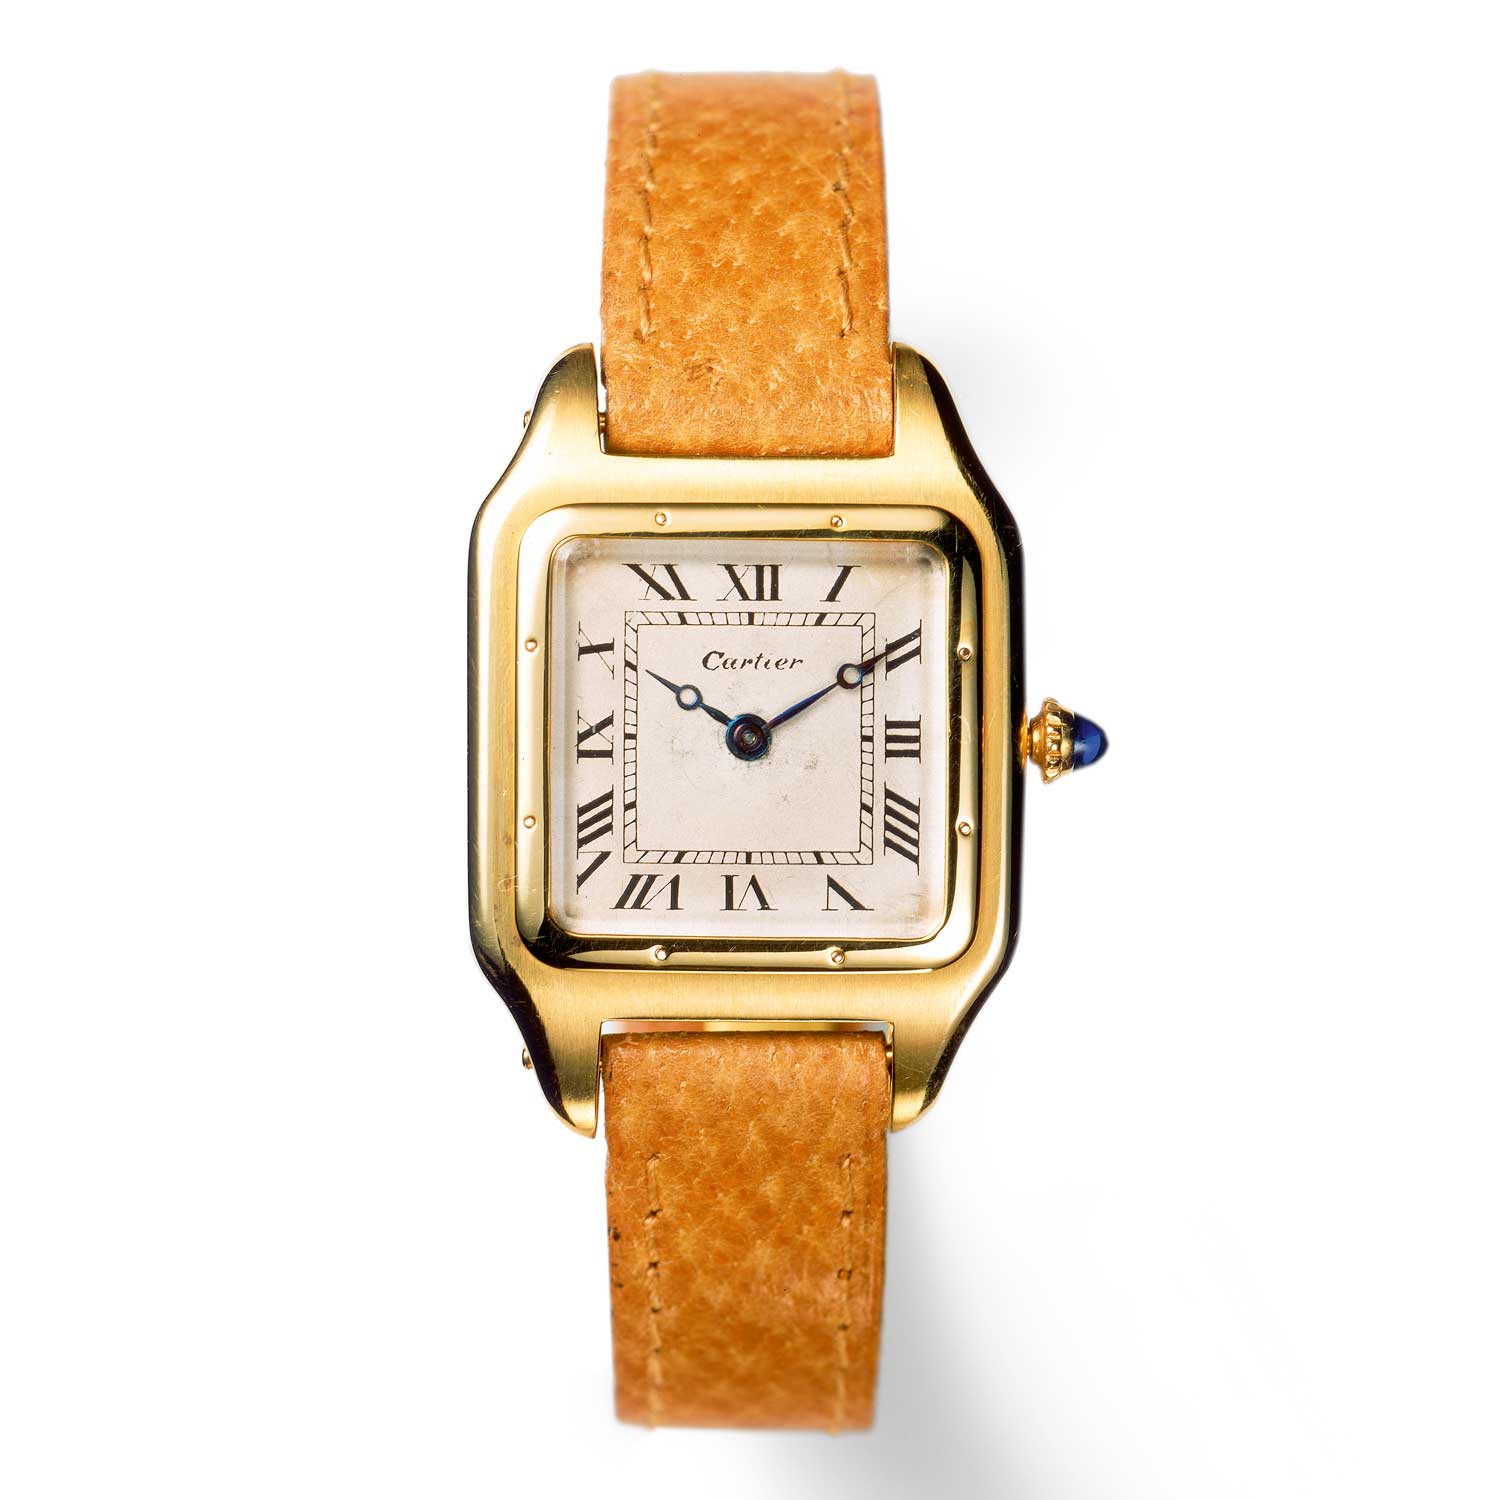 An early yellow gold Santos, the archetypal modern wristwatch